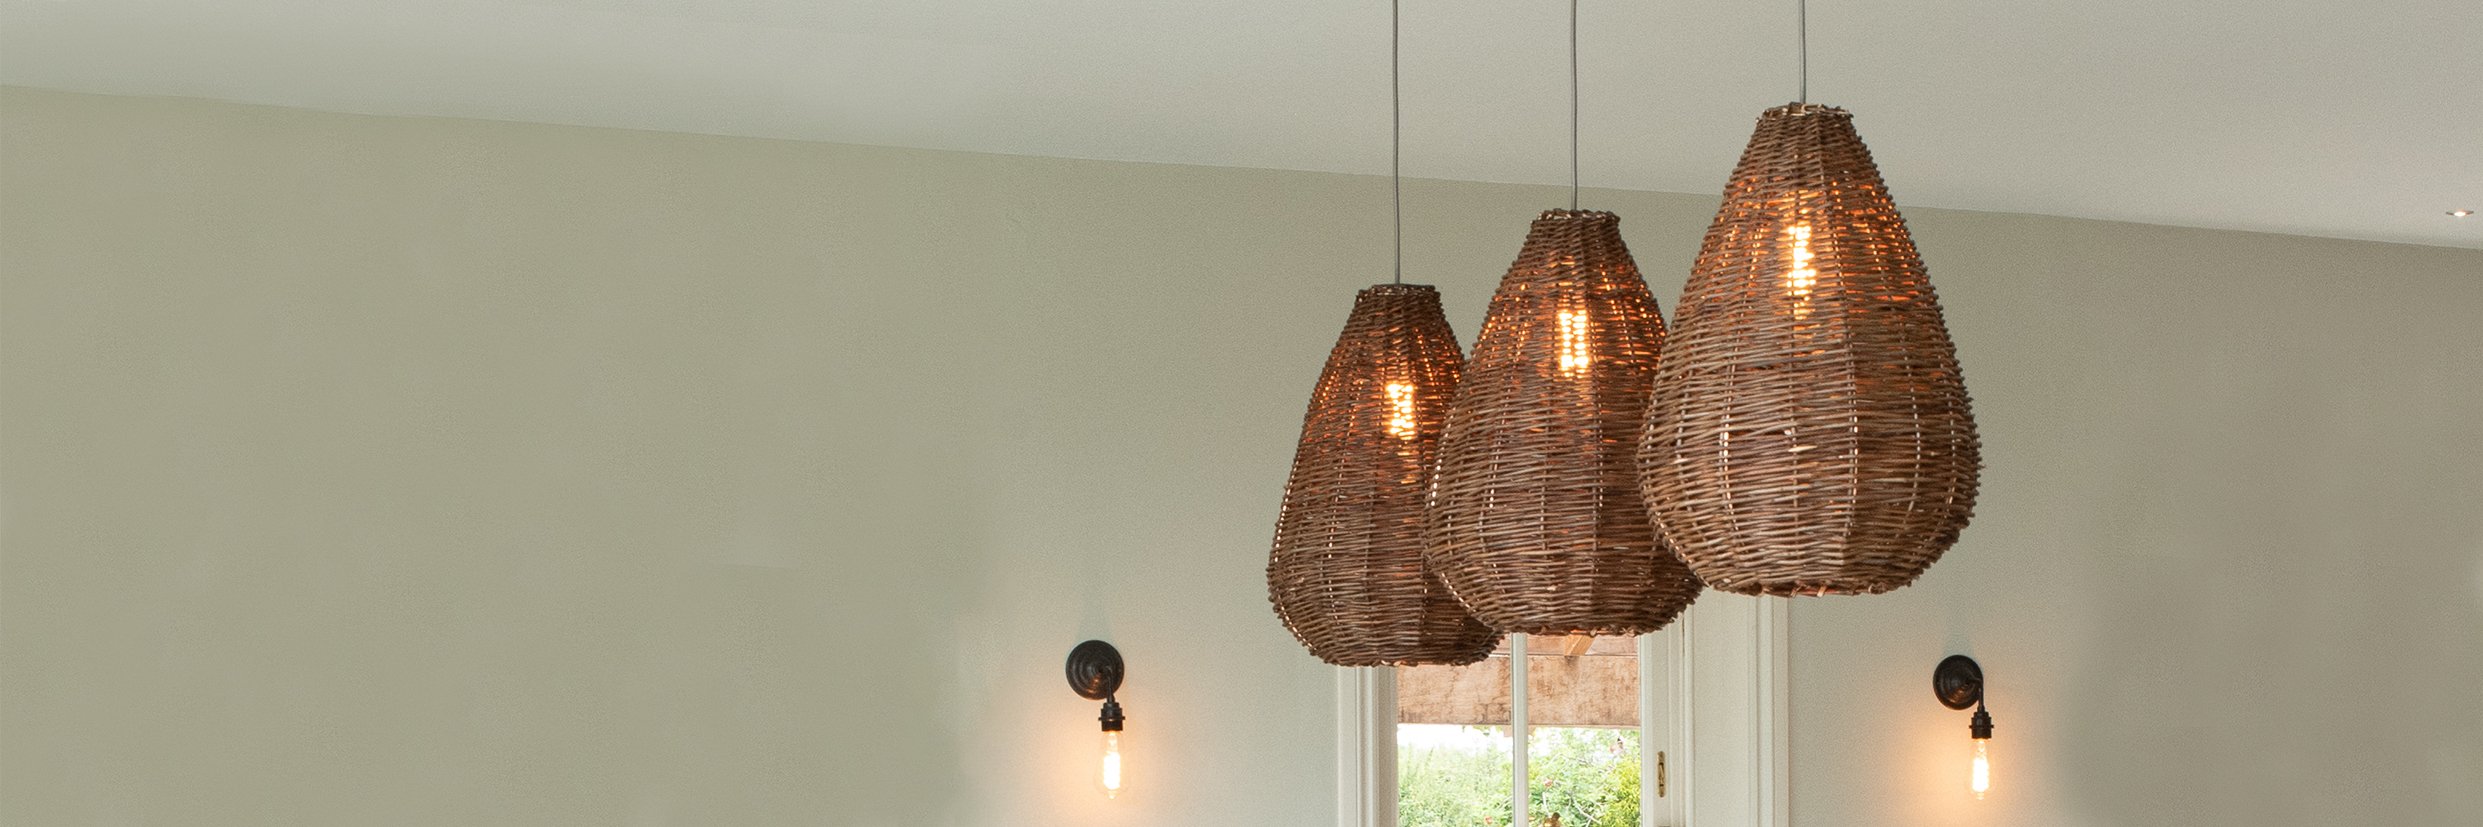 Wicker-Pendant-Lights-made-by-Fritz-Fryer-lighting-hung-in-a-row